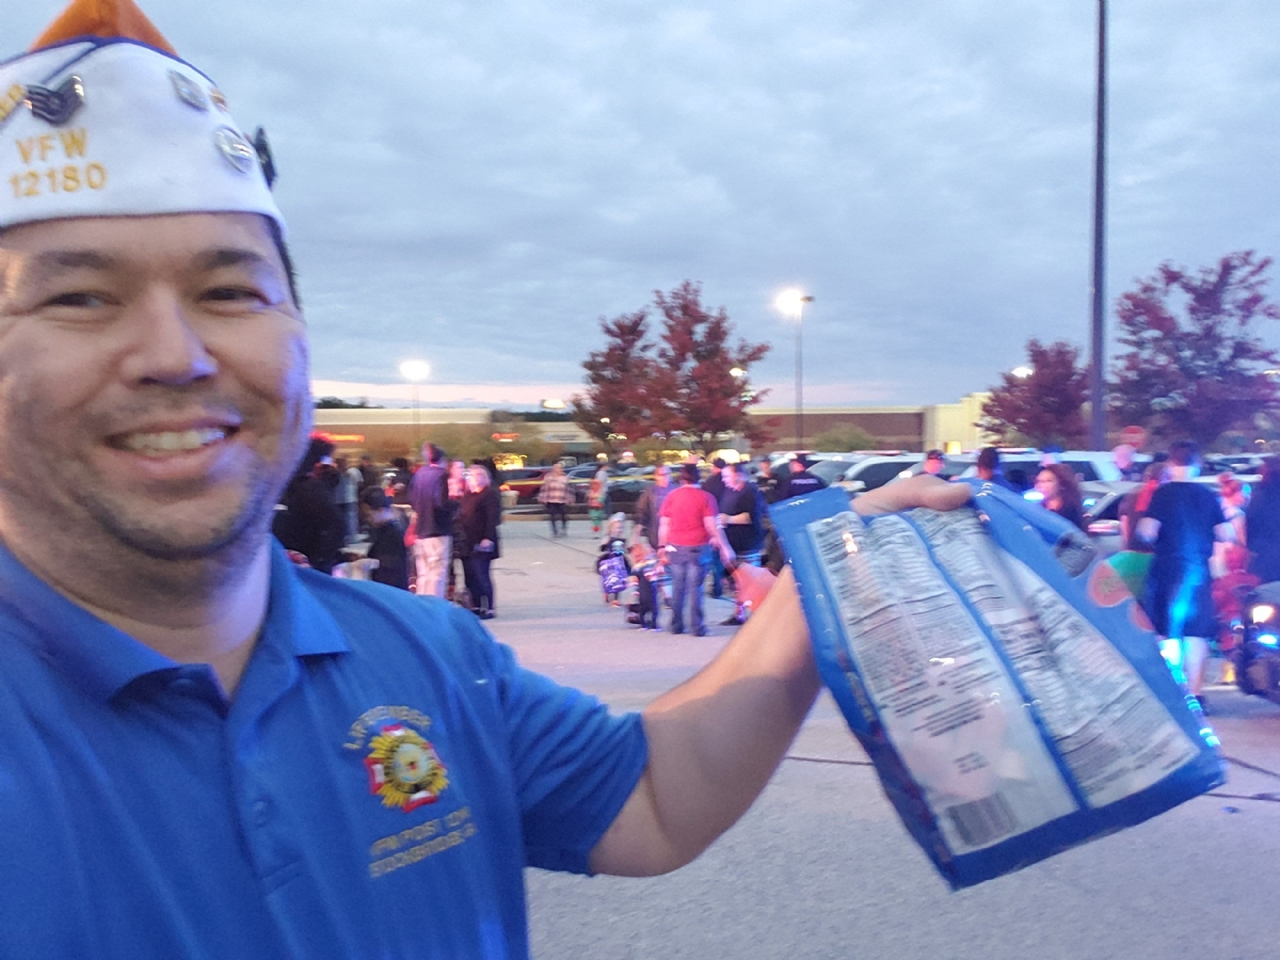 Henry County Police, Federal Police, State Police, and Fire Departments Community engagement. 

In Picture: Greg Doss (Youth and JROTC Programs Chairman) representing for the post and handing out candy.